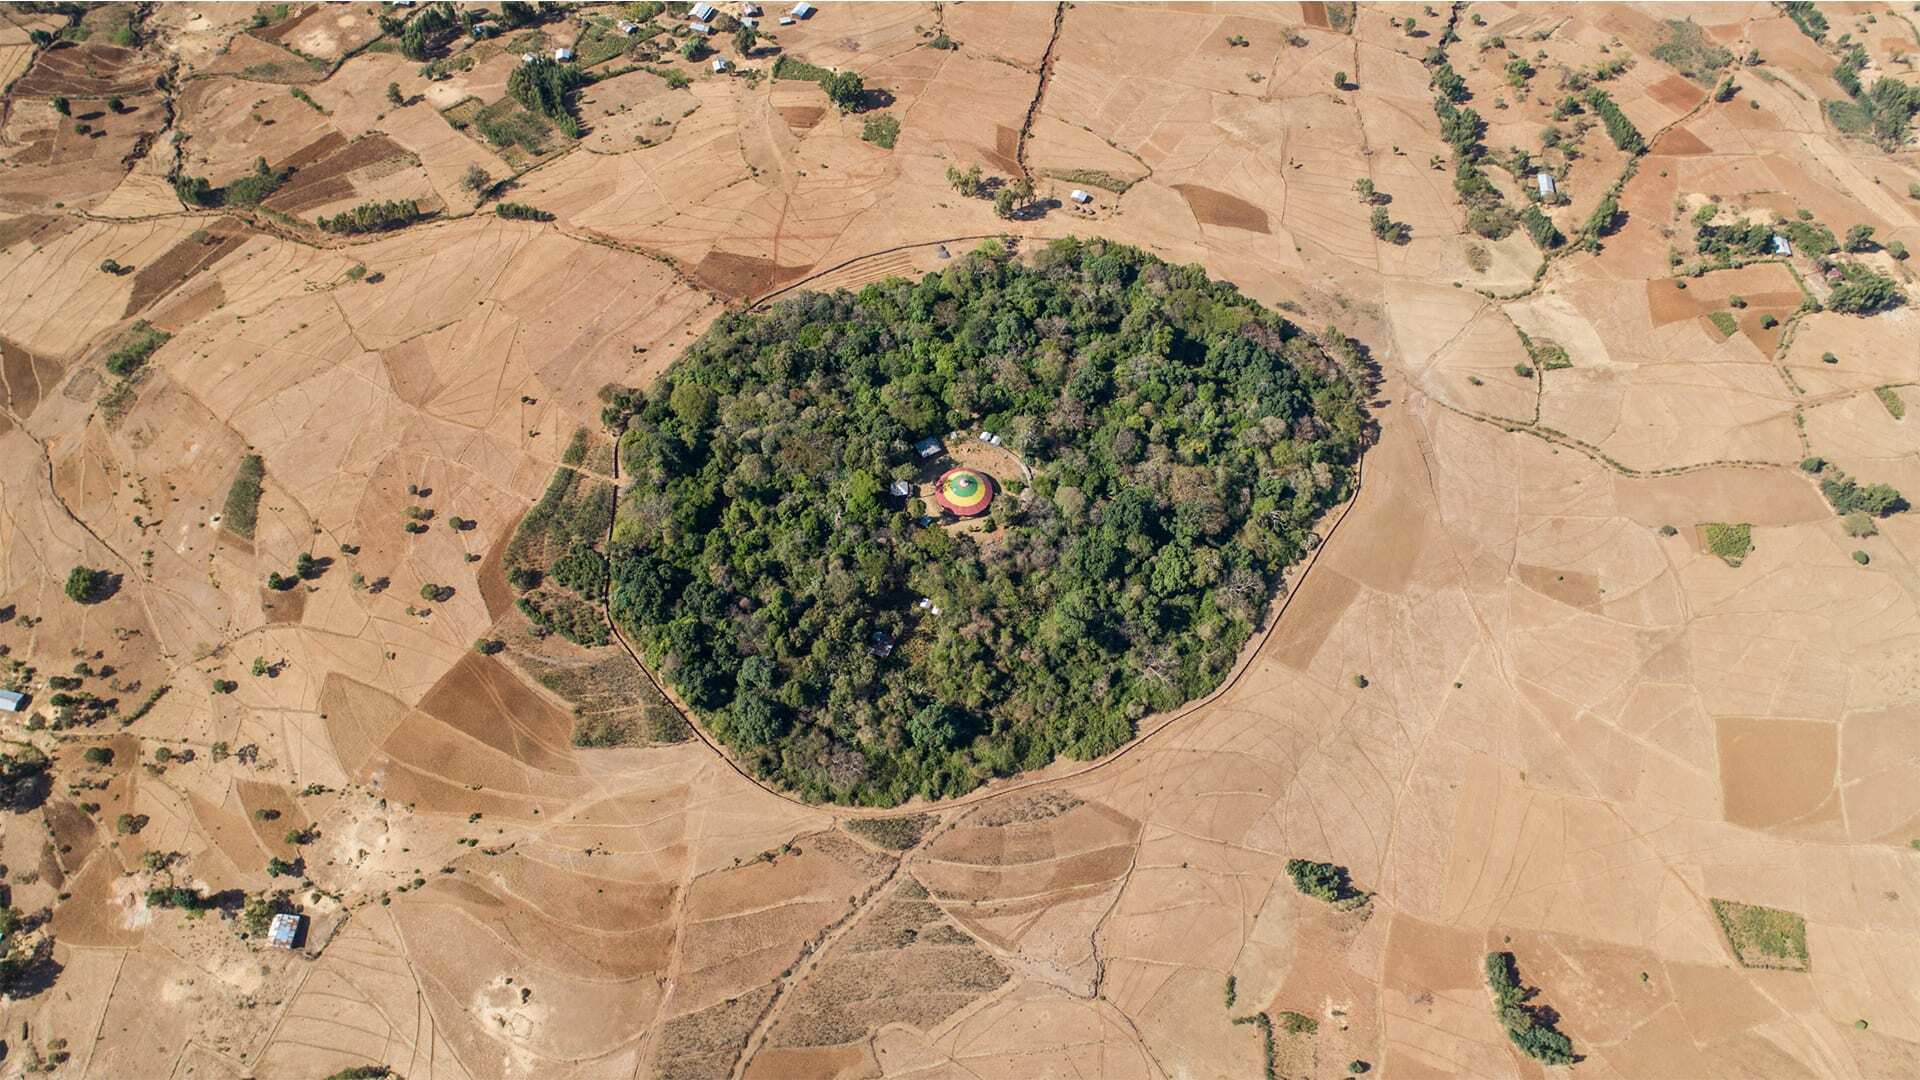 The Church Forests of Ethiopia